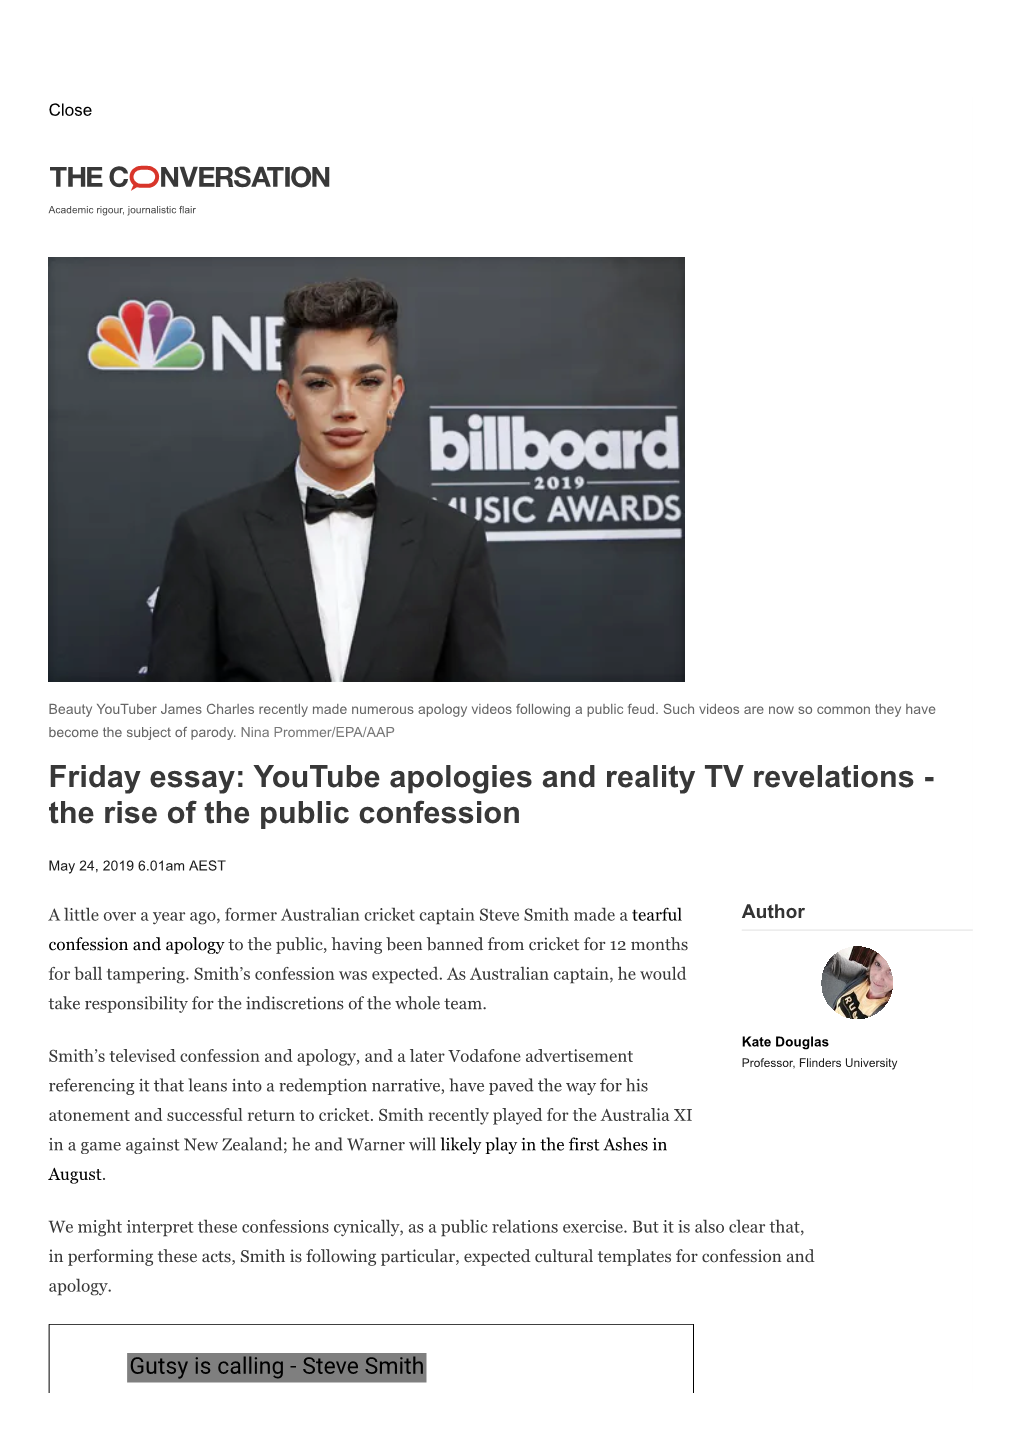 Friday Essay: Youtube Apologies and Reality TV Revelations - the Rise of the Public Confession